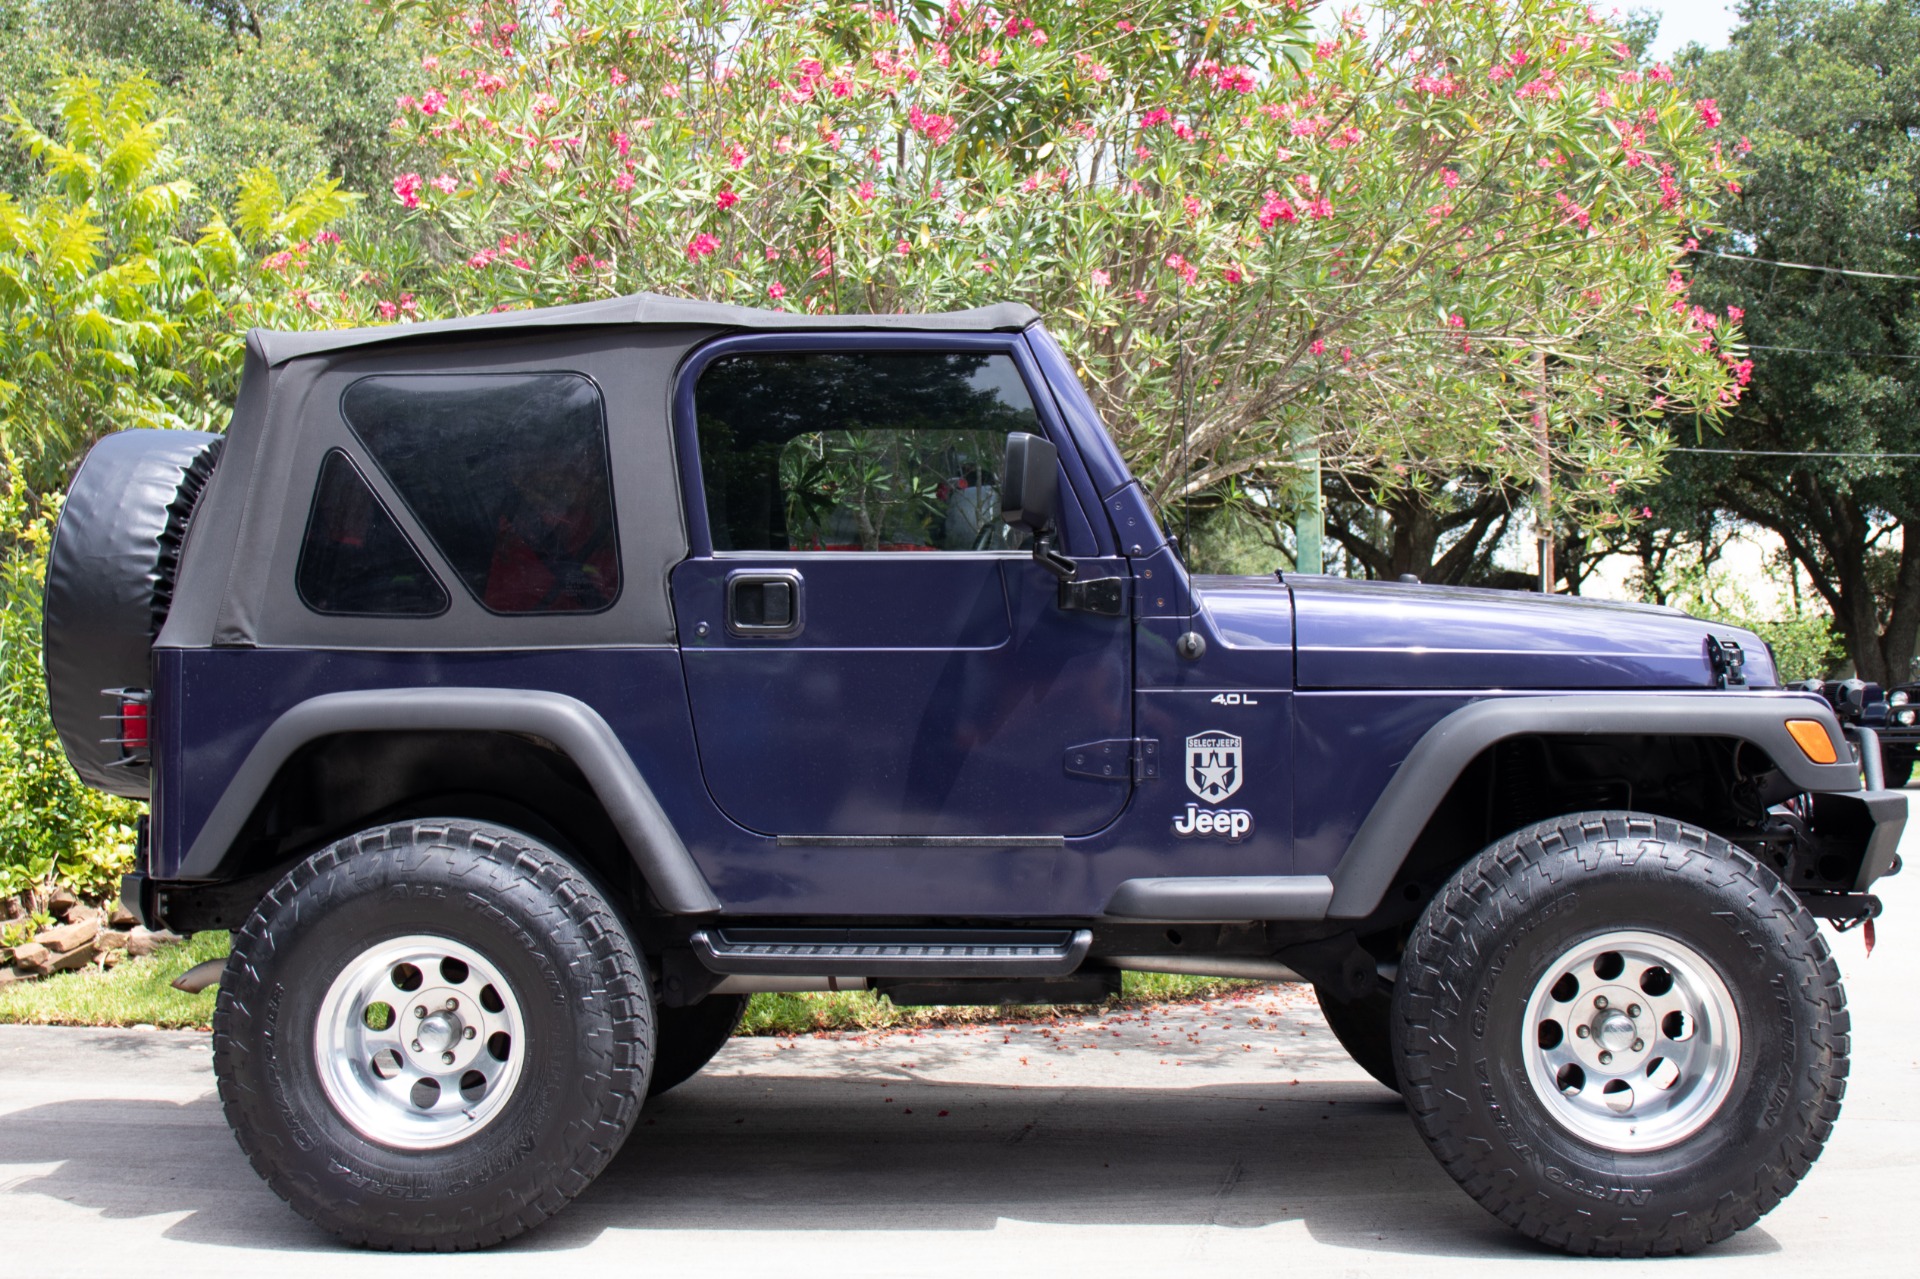 Used 1998 Jeep Wrangler Sport For Sale ($13,995) | Select Jeeps Inc. Stock  #707517